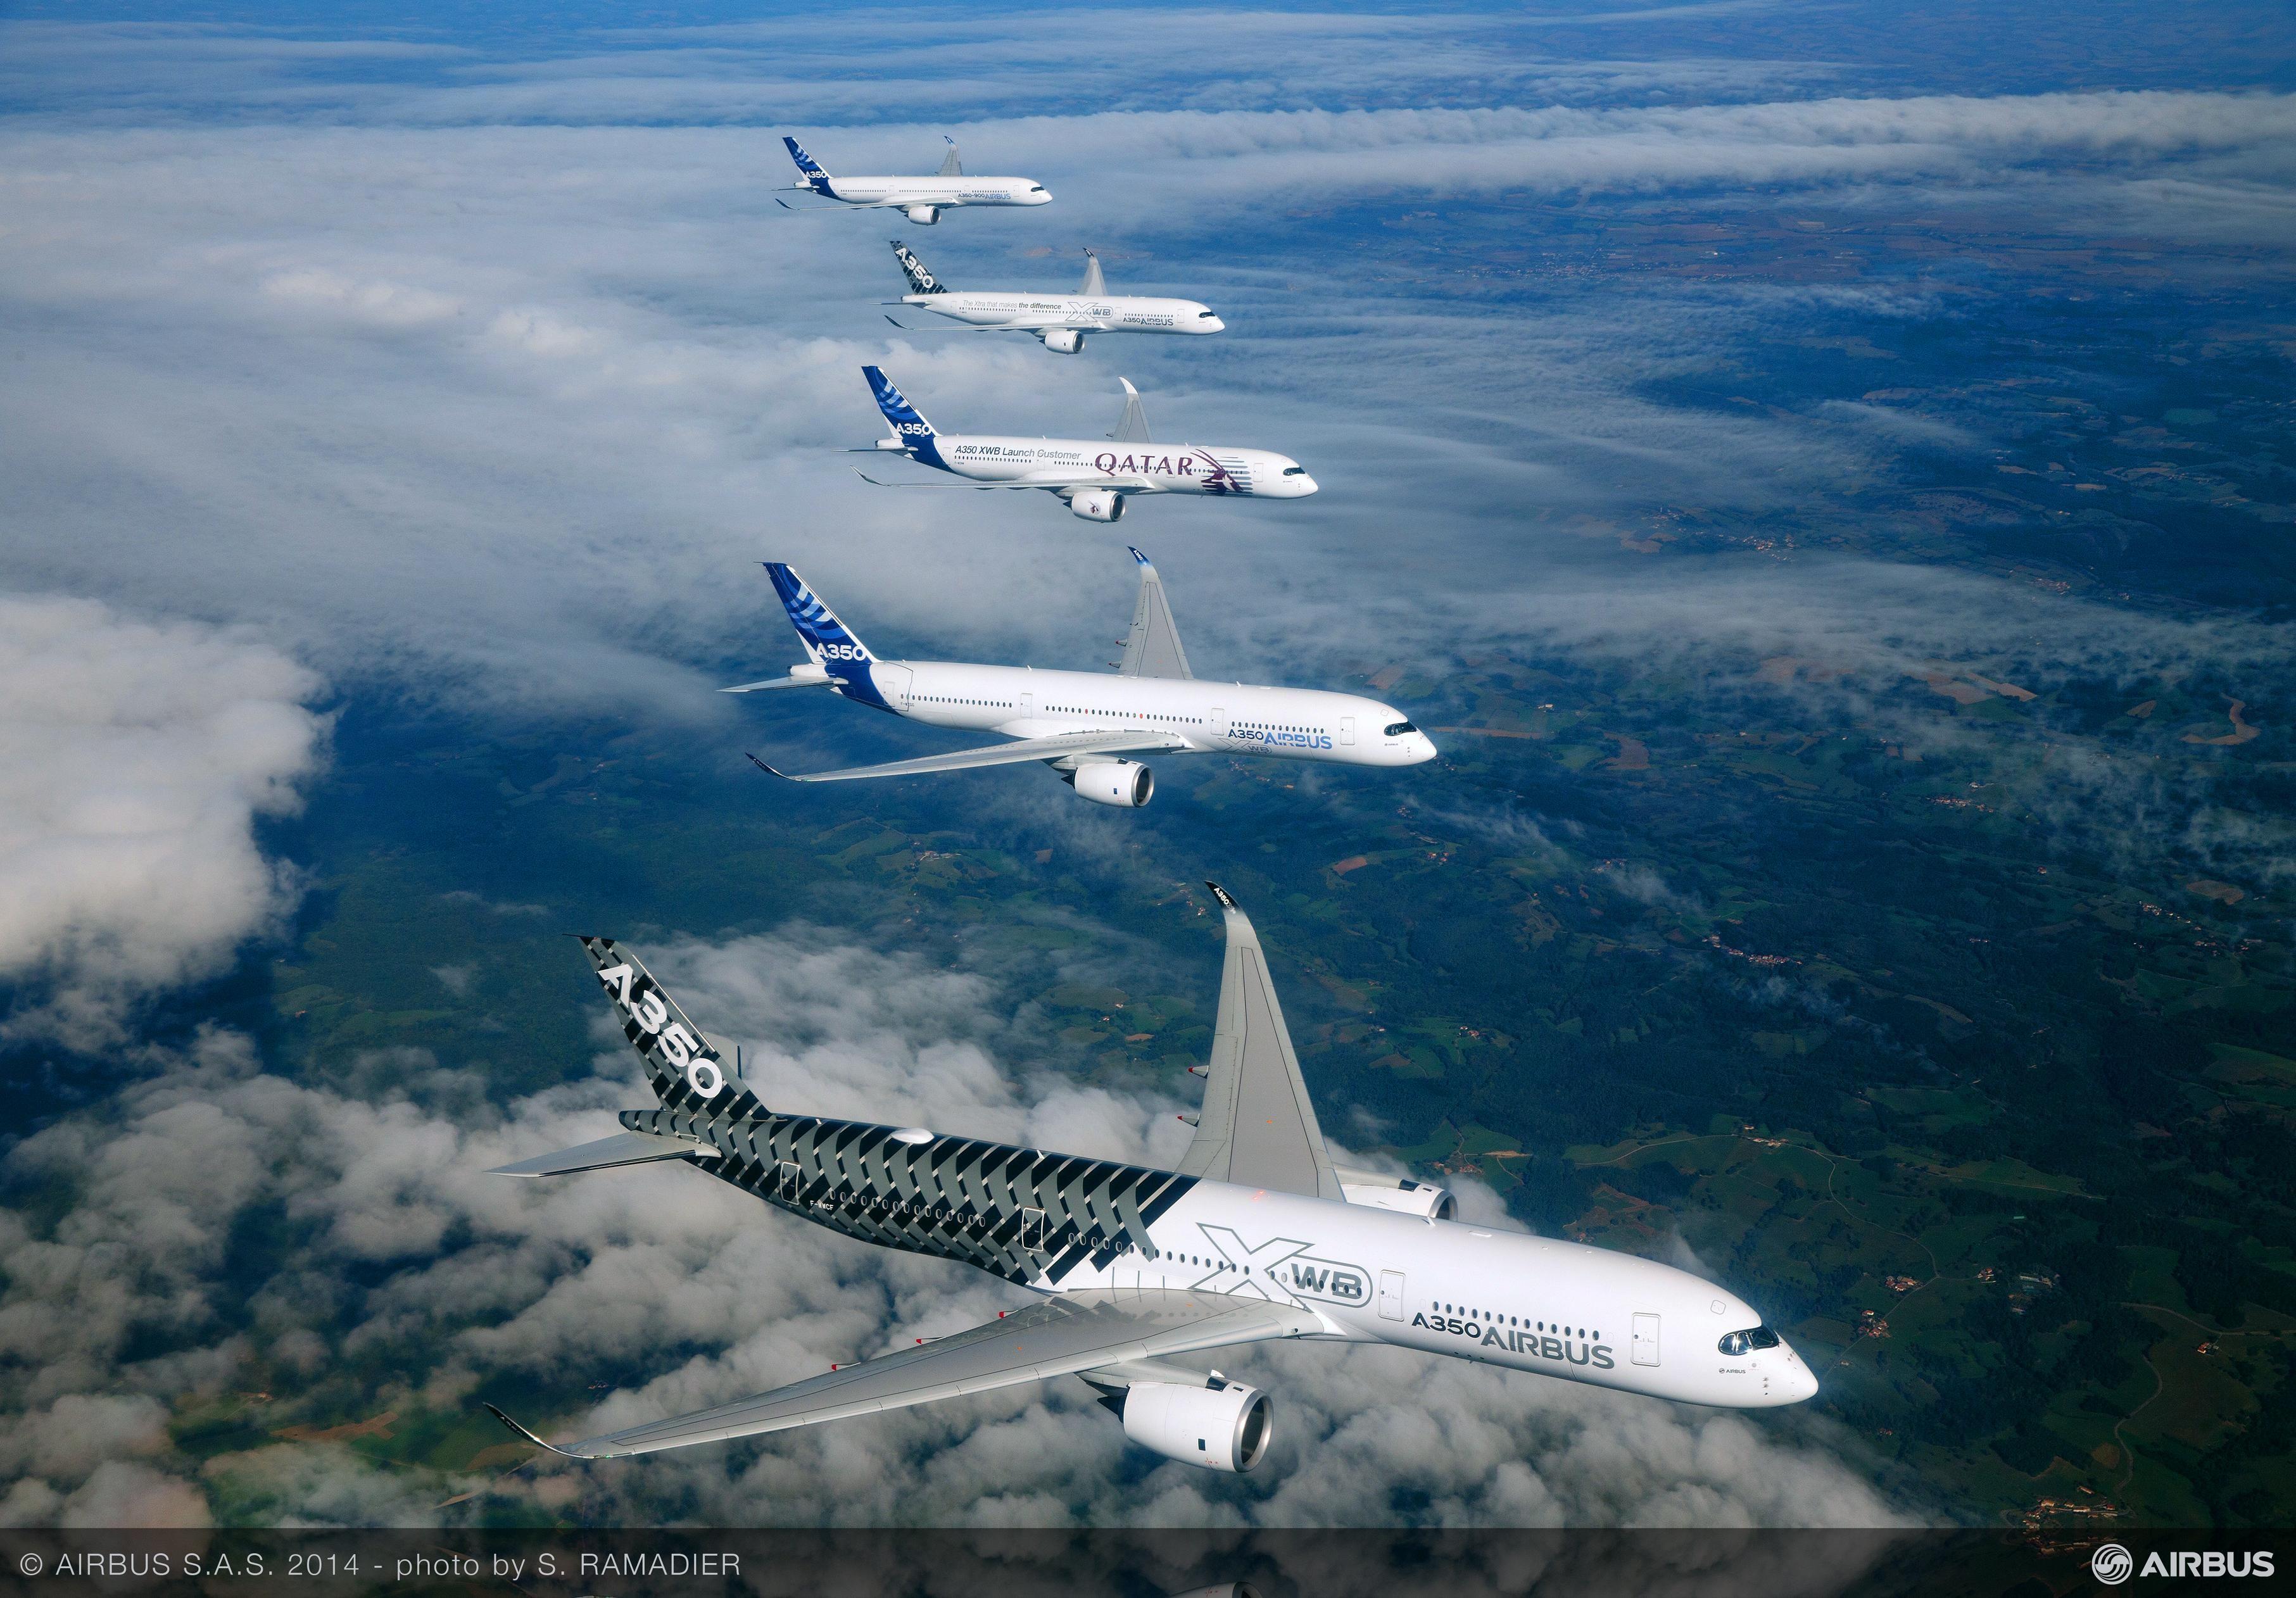 Airbus A350 900 Receives EASA Type Certification. Airbus Press